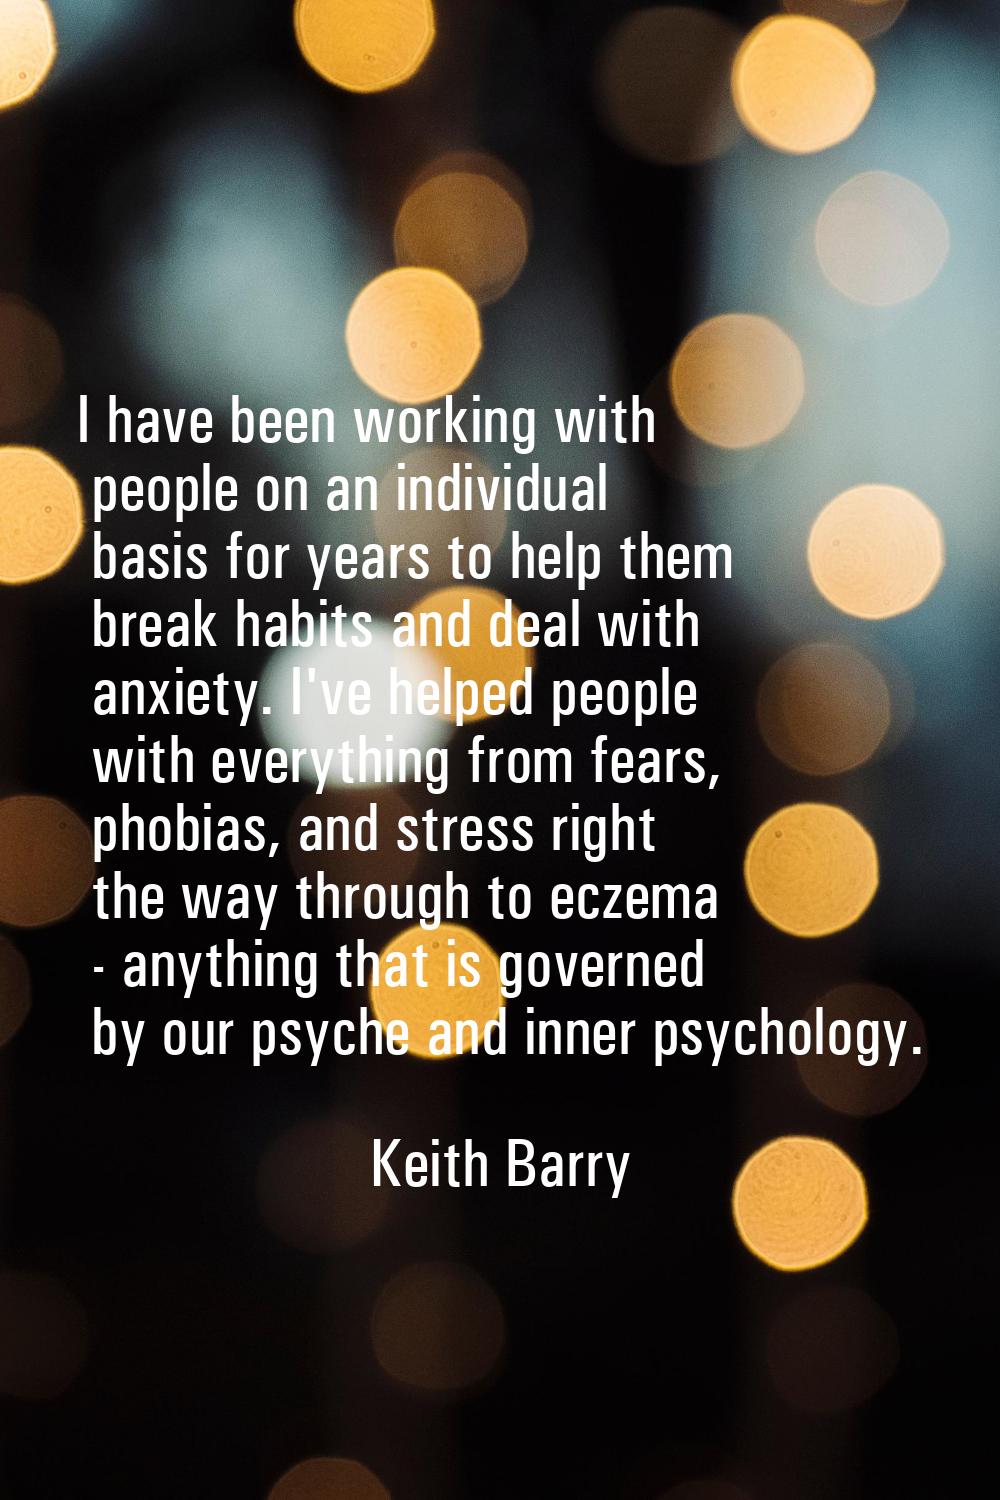 I have been working with people on an individual basis for years to help them break habits and deal